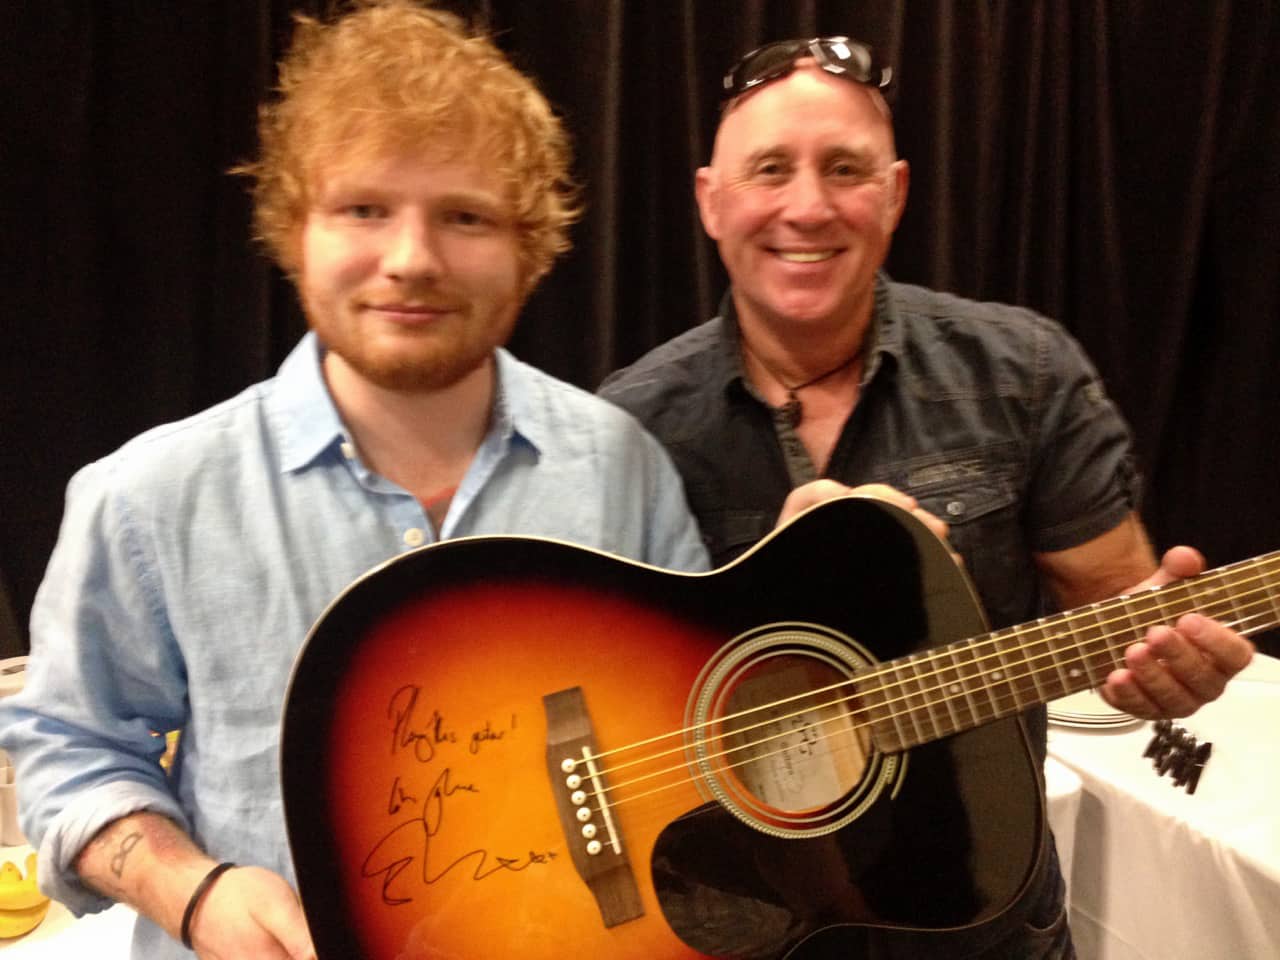 BID on an exclusive opportunity for you and a friend to meet ED SHEERAN!